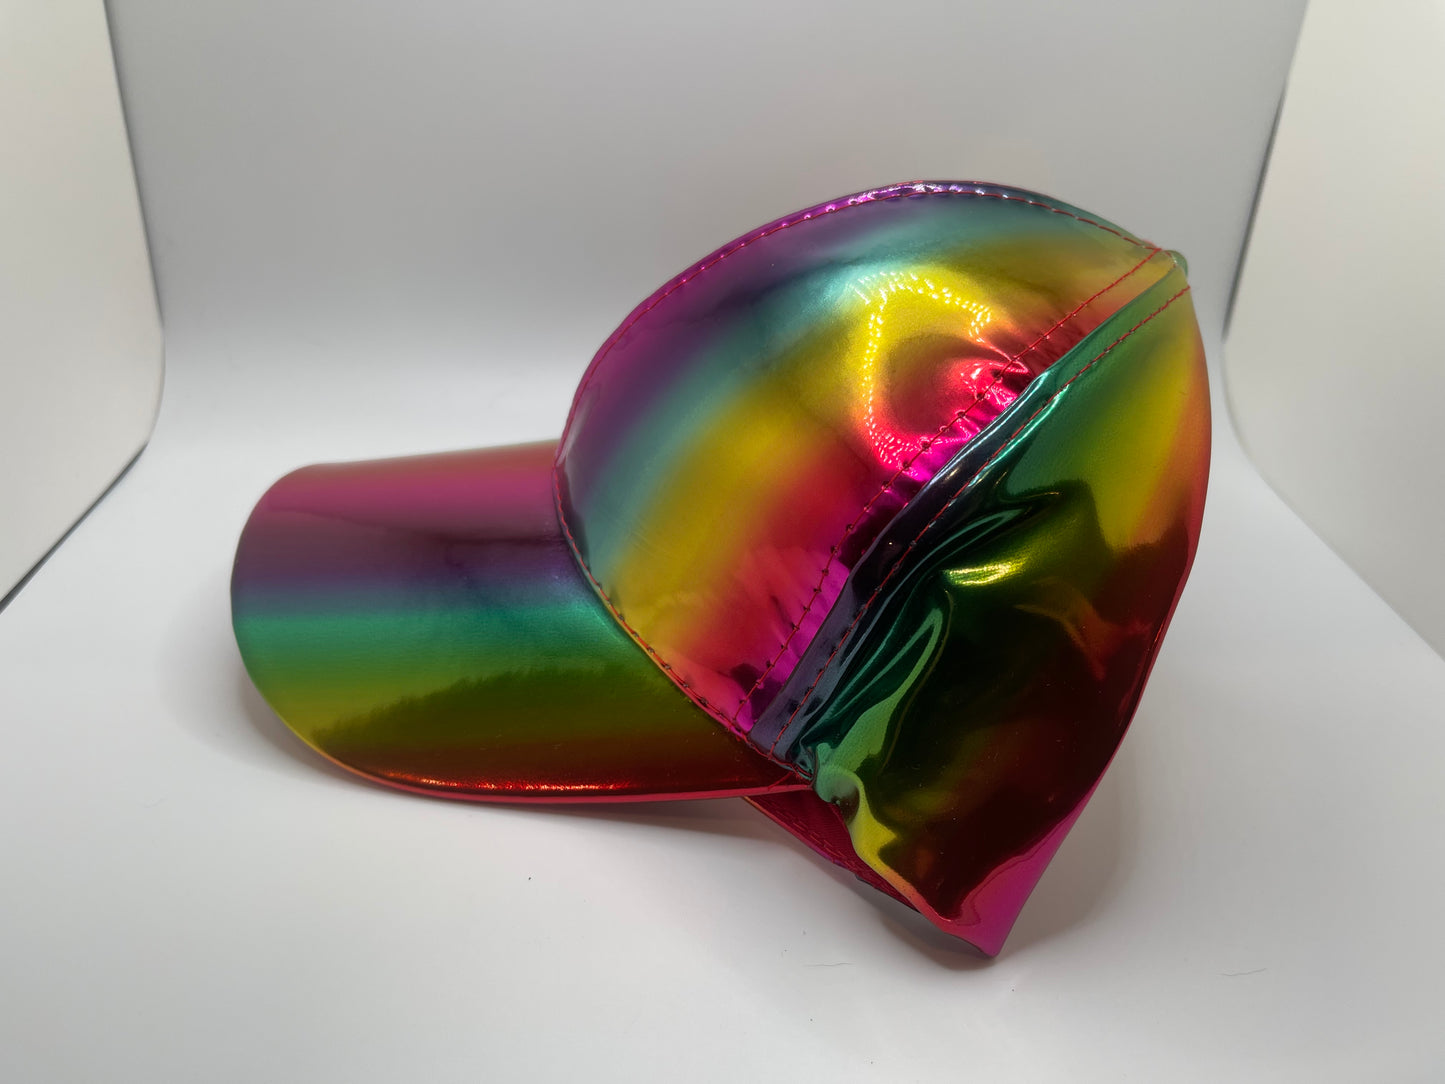 BACK TO THE FUTURE "RAINBOW" HAT